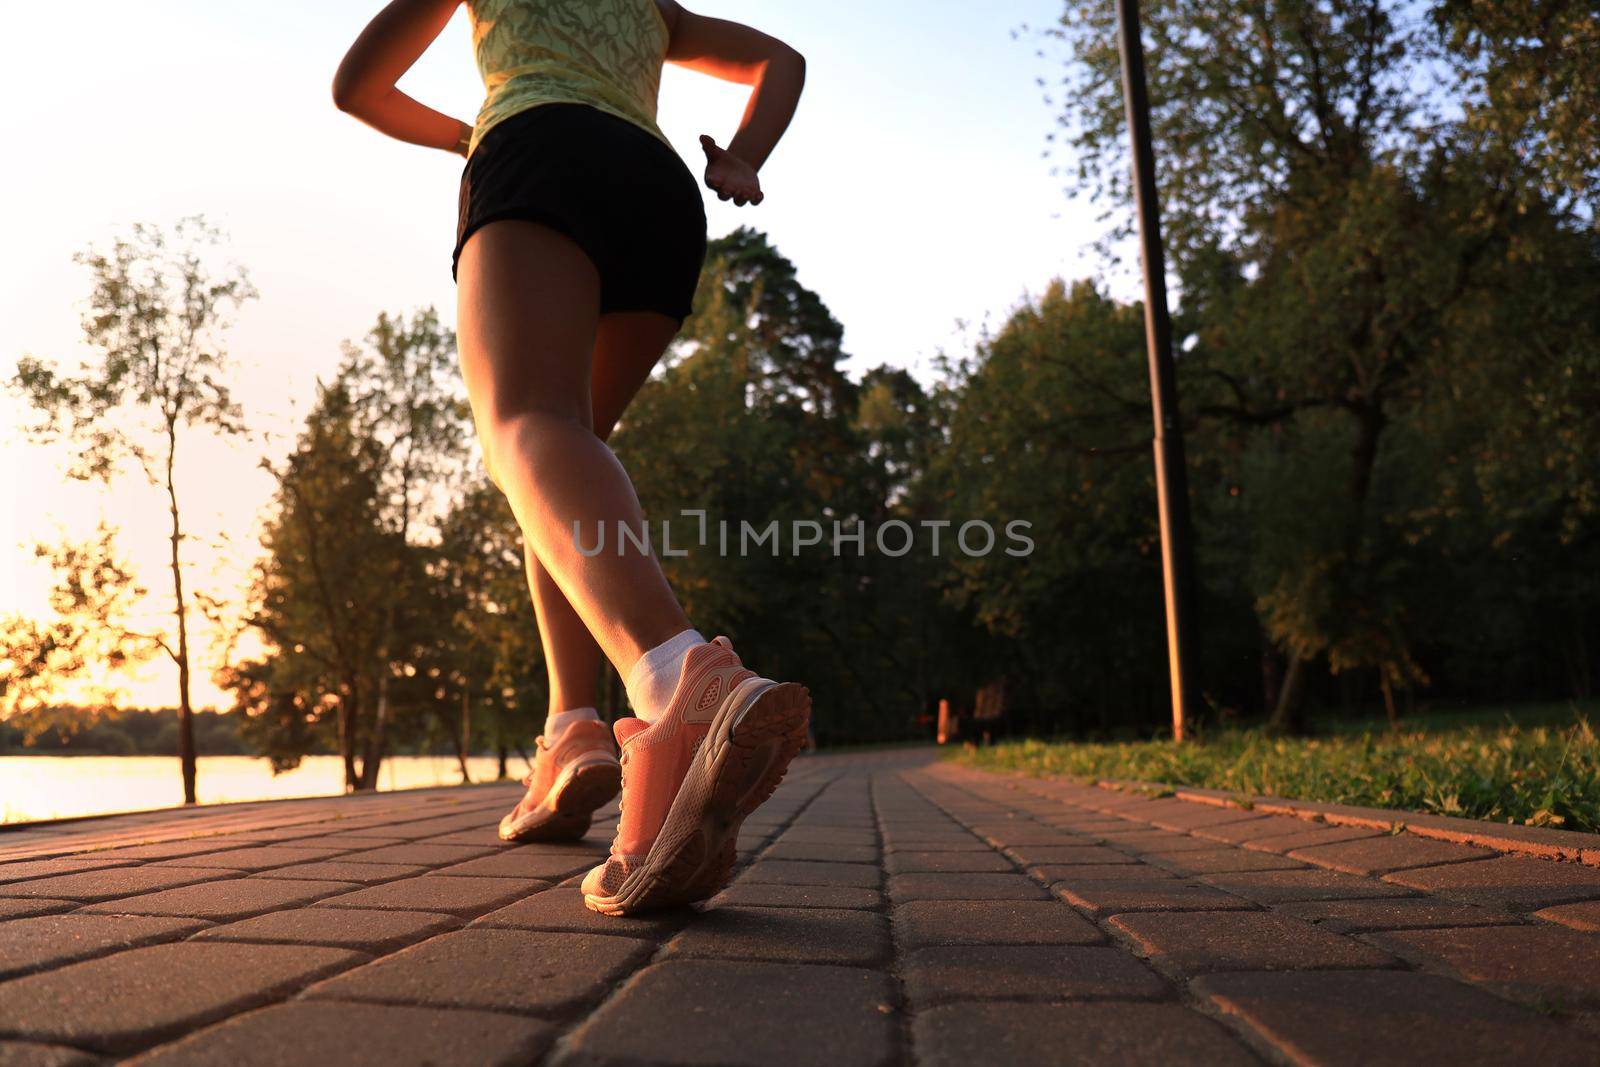 Runner feet running on road closeup on shoe, outdoor at sunset or sunrise. by tsyhun